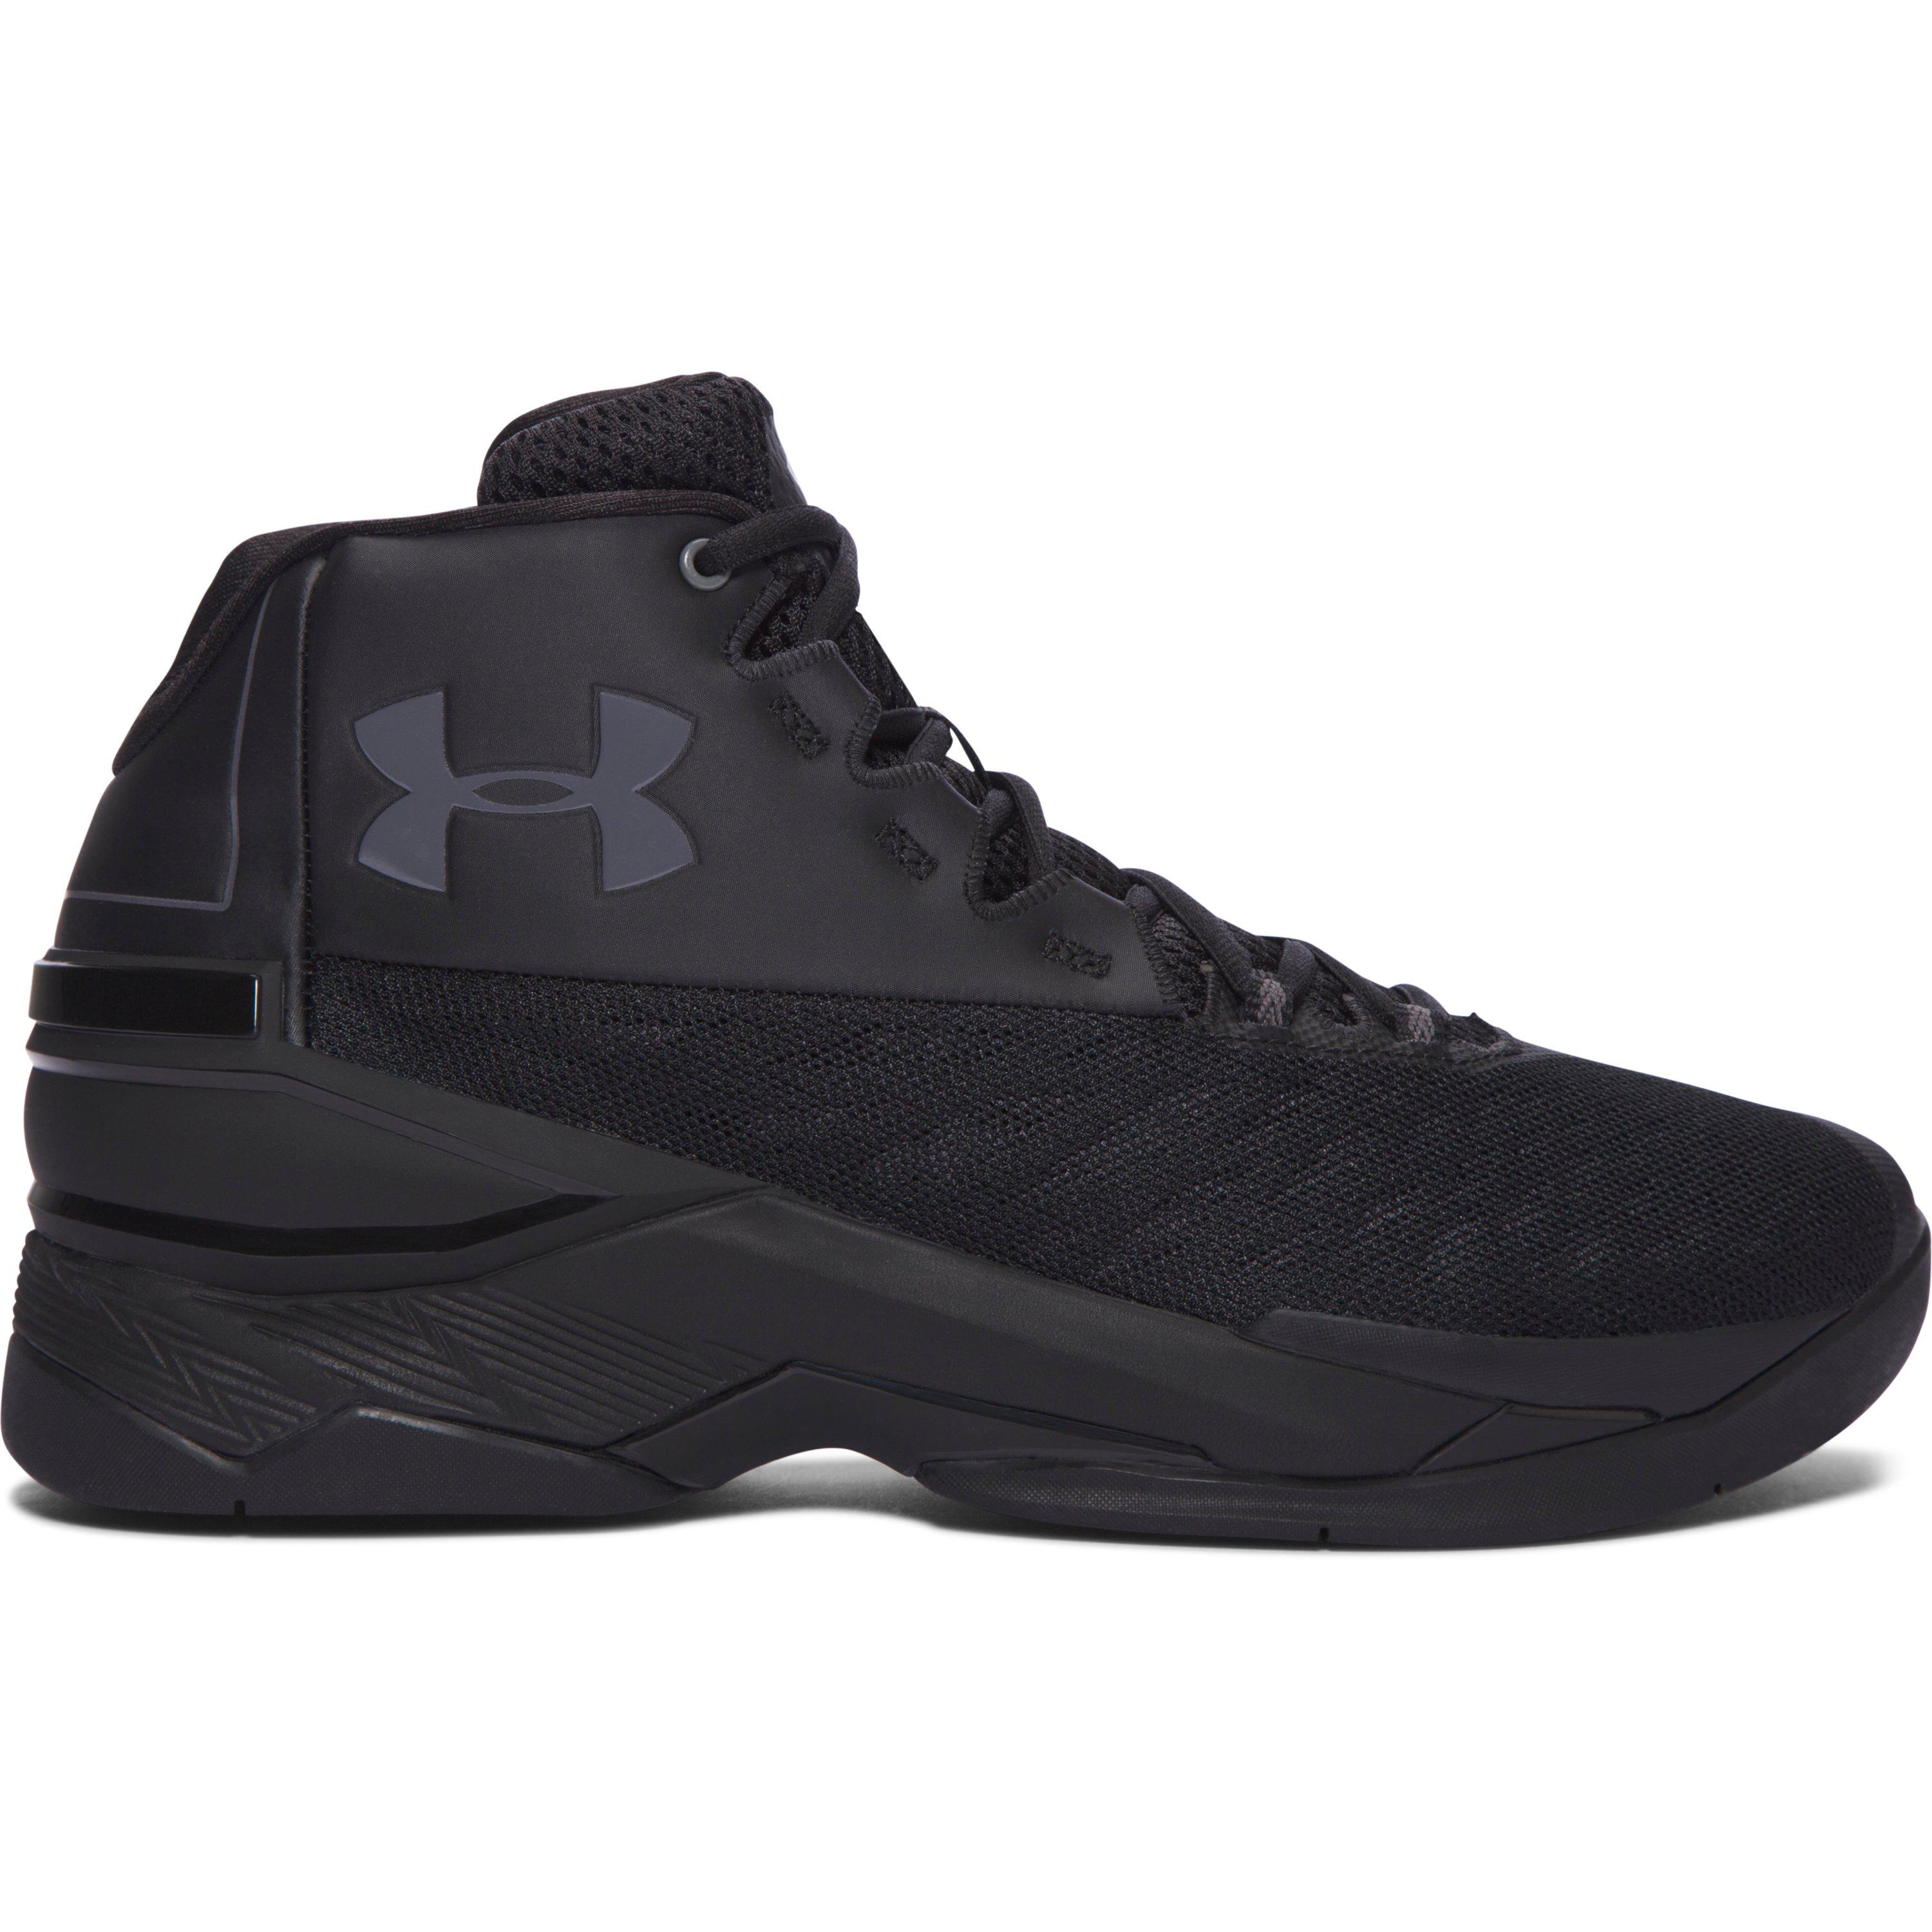 Under Armour Leather Men's Ua Longshot Basketball Shoes in Black for